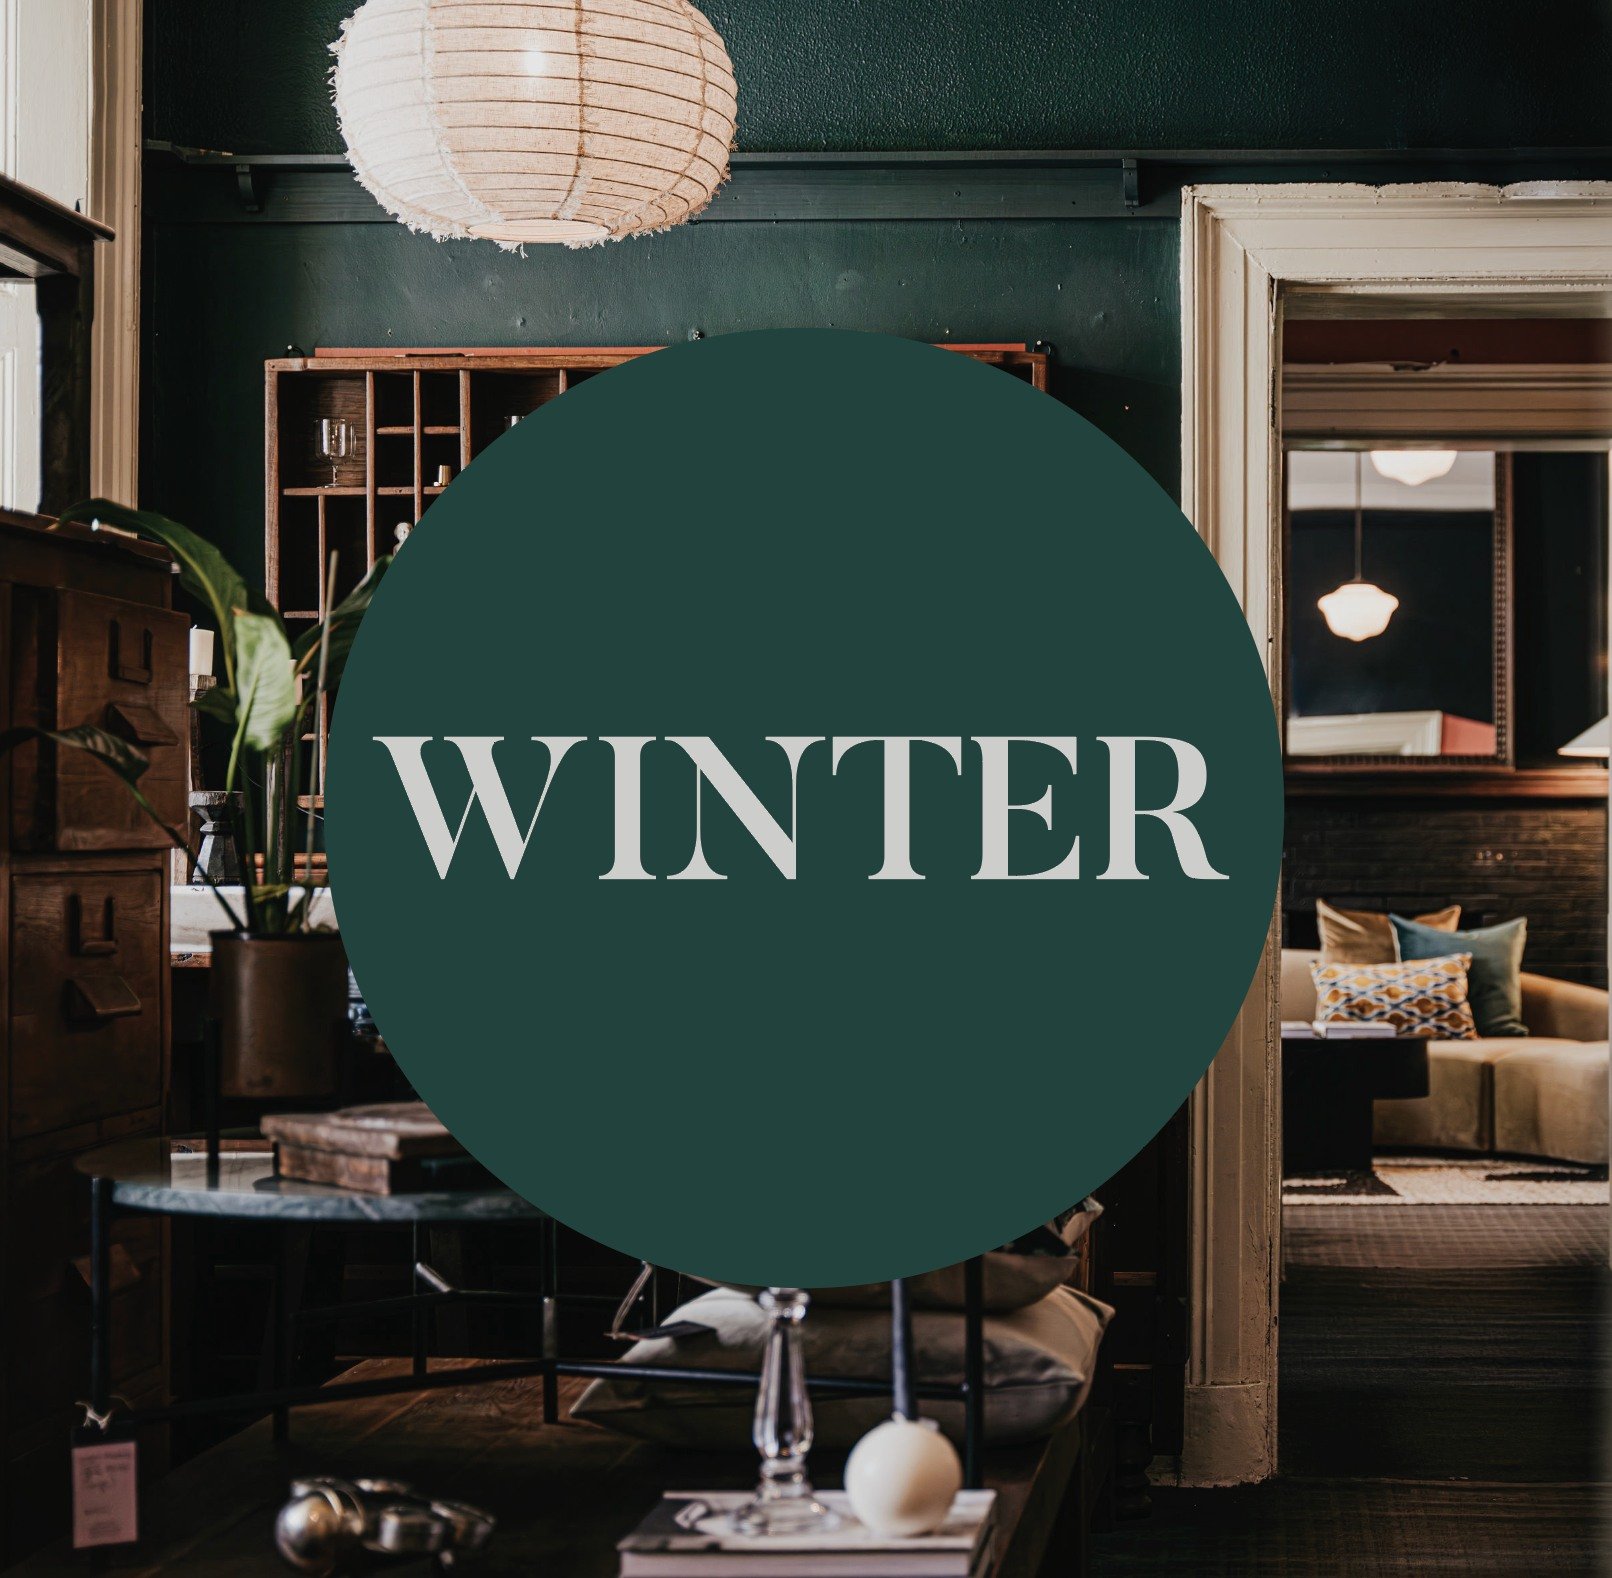 Loved dearly by both locals and visitors alike, LOST has earned its reputation as the go-to guide for discovering the hidden gems of Daylesford &amp; surrounds 

We invite you to be a part of our upcoming WINTER edition and showcase your business to 